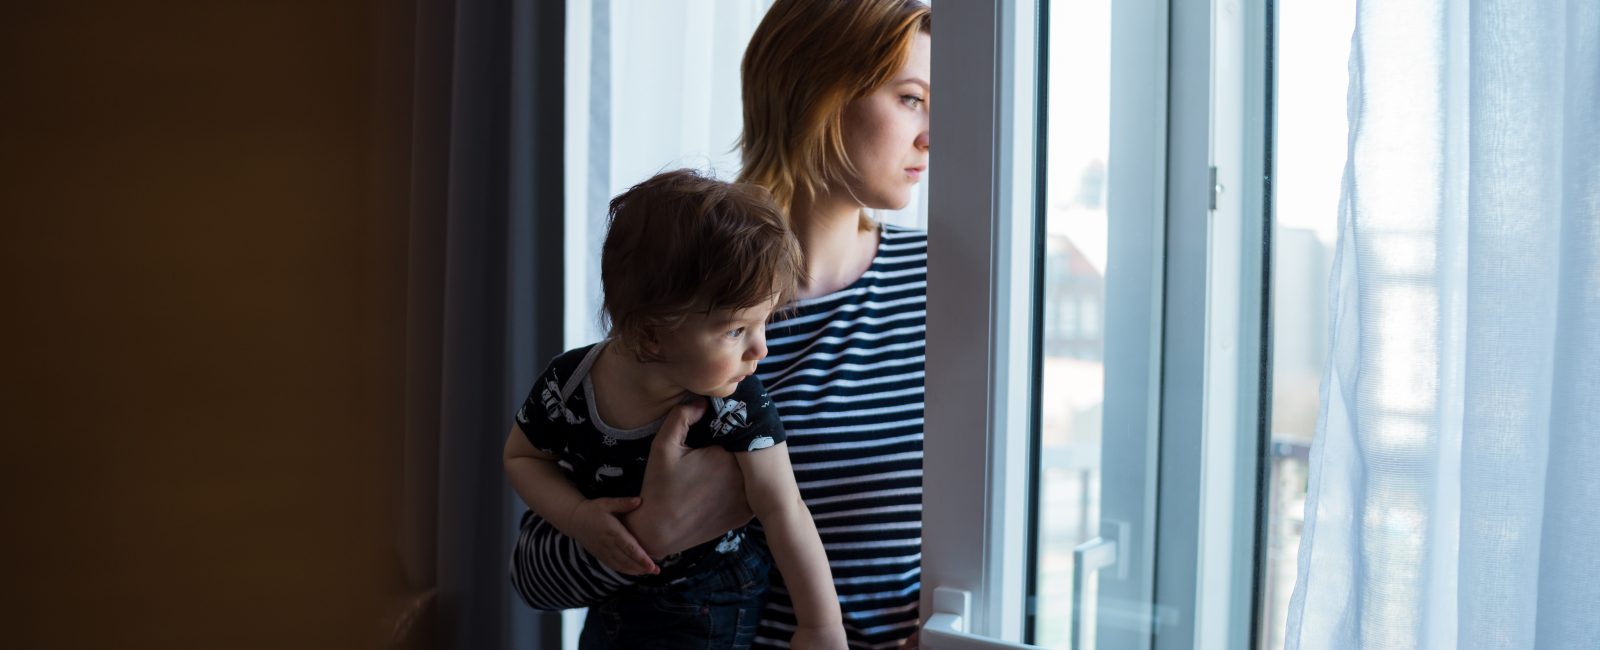 woman staring out of window with child